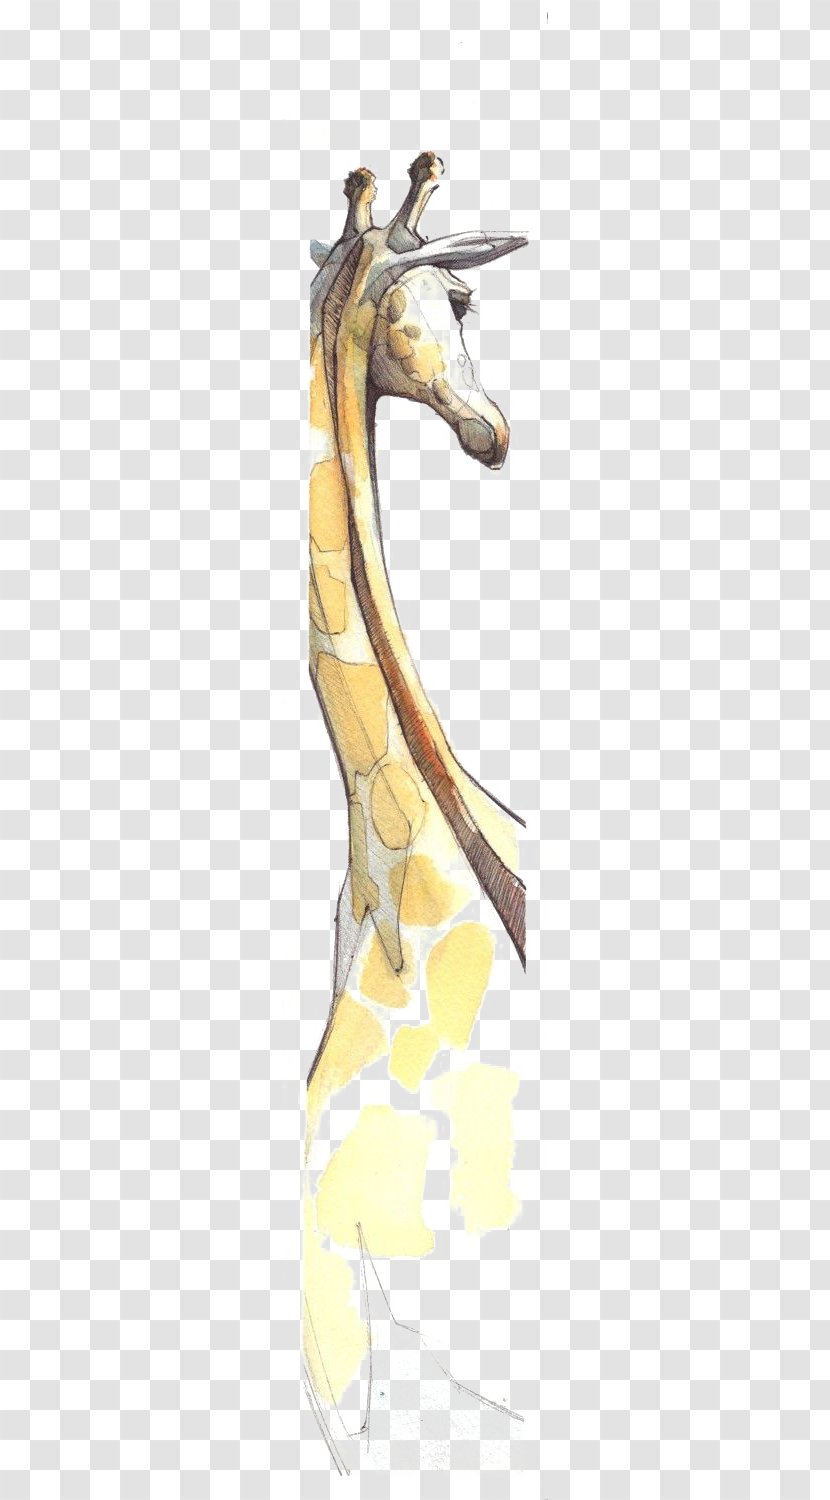 Giraffe Drawing Watercolor Painting Illustration - Hand-painted Transparent PNG